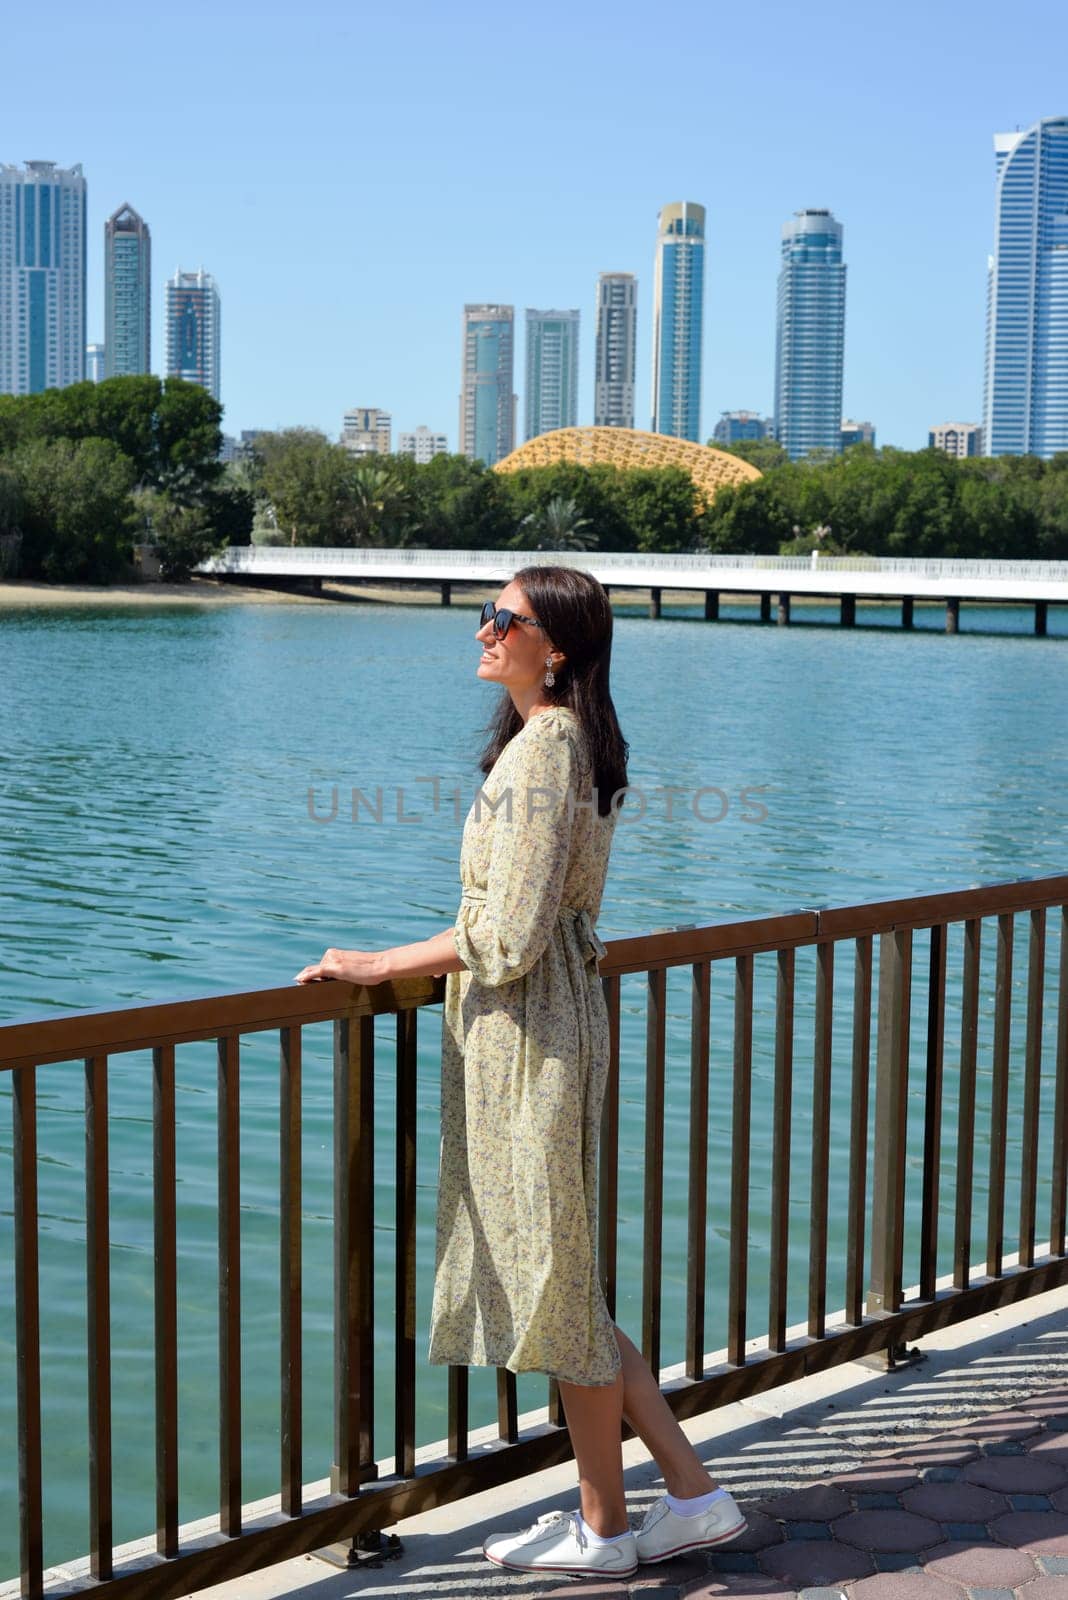 Cityscape of Sharjah UAE. A young woman in a long dress enjoys the view of skyscrapers and relaxing. by Ekaterina34